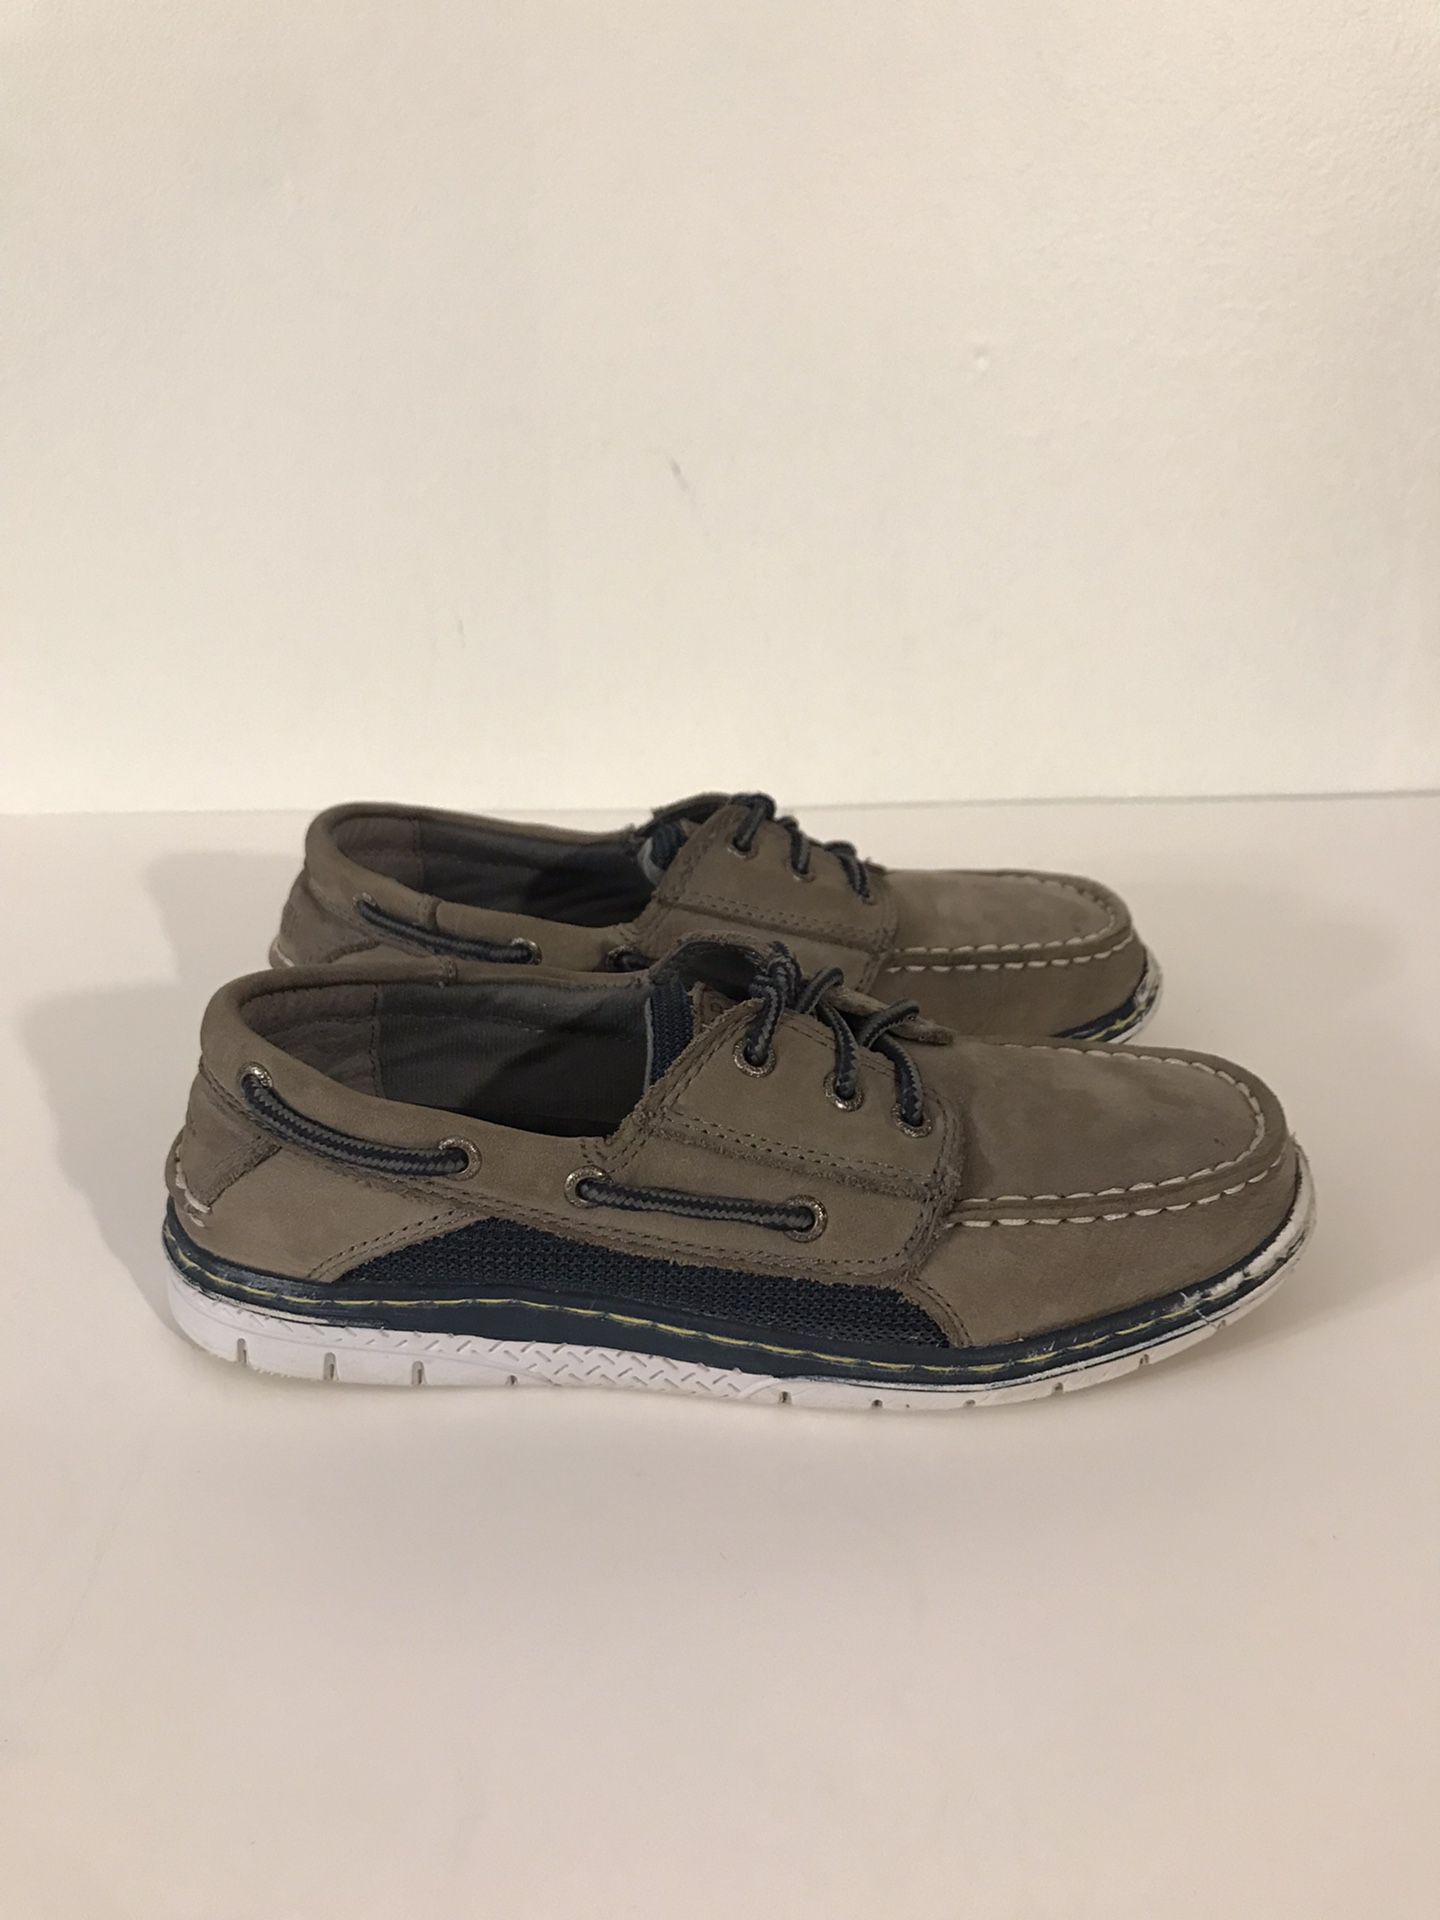 Sperry Top-Sider Billfish Sport Gray & Navy Blue Leather Boat Shoes Boys Size 4M